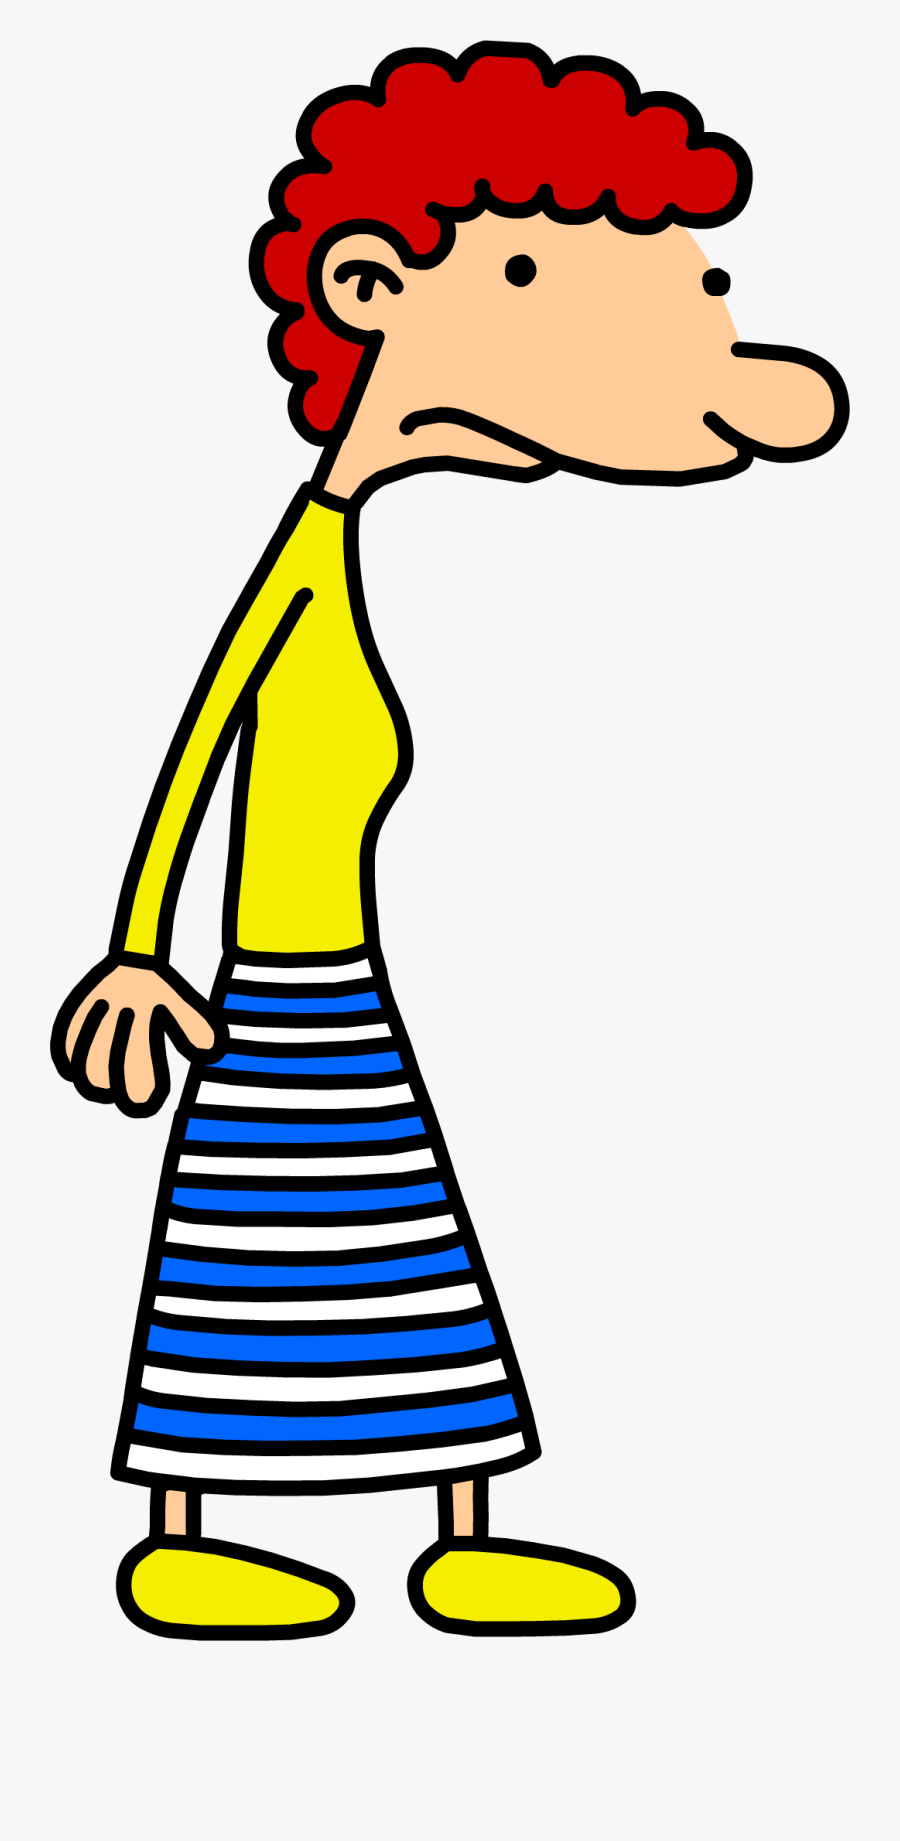 Diary Of A Wimpy Kid Wiki - Fregley Wimpy Kid Mum, Transparent Clipart